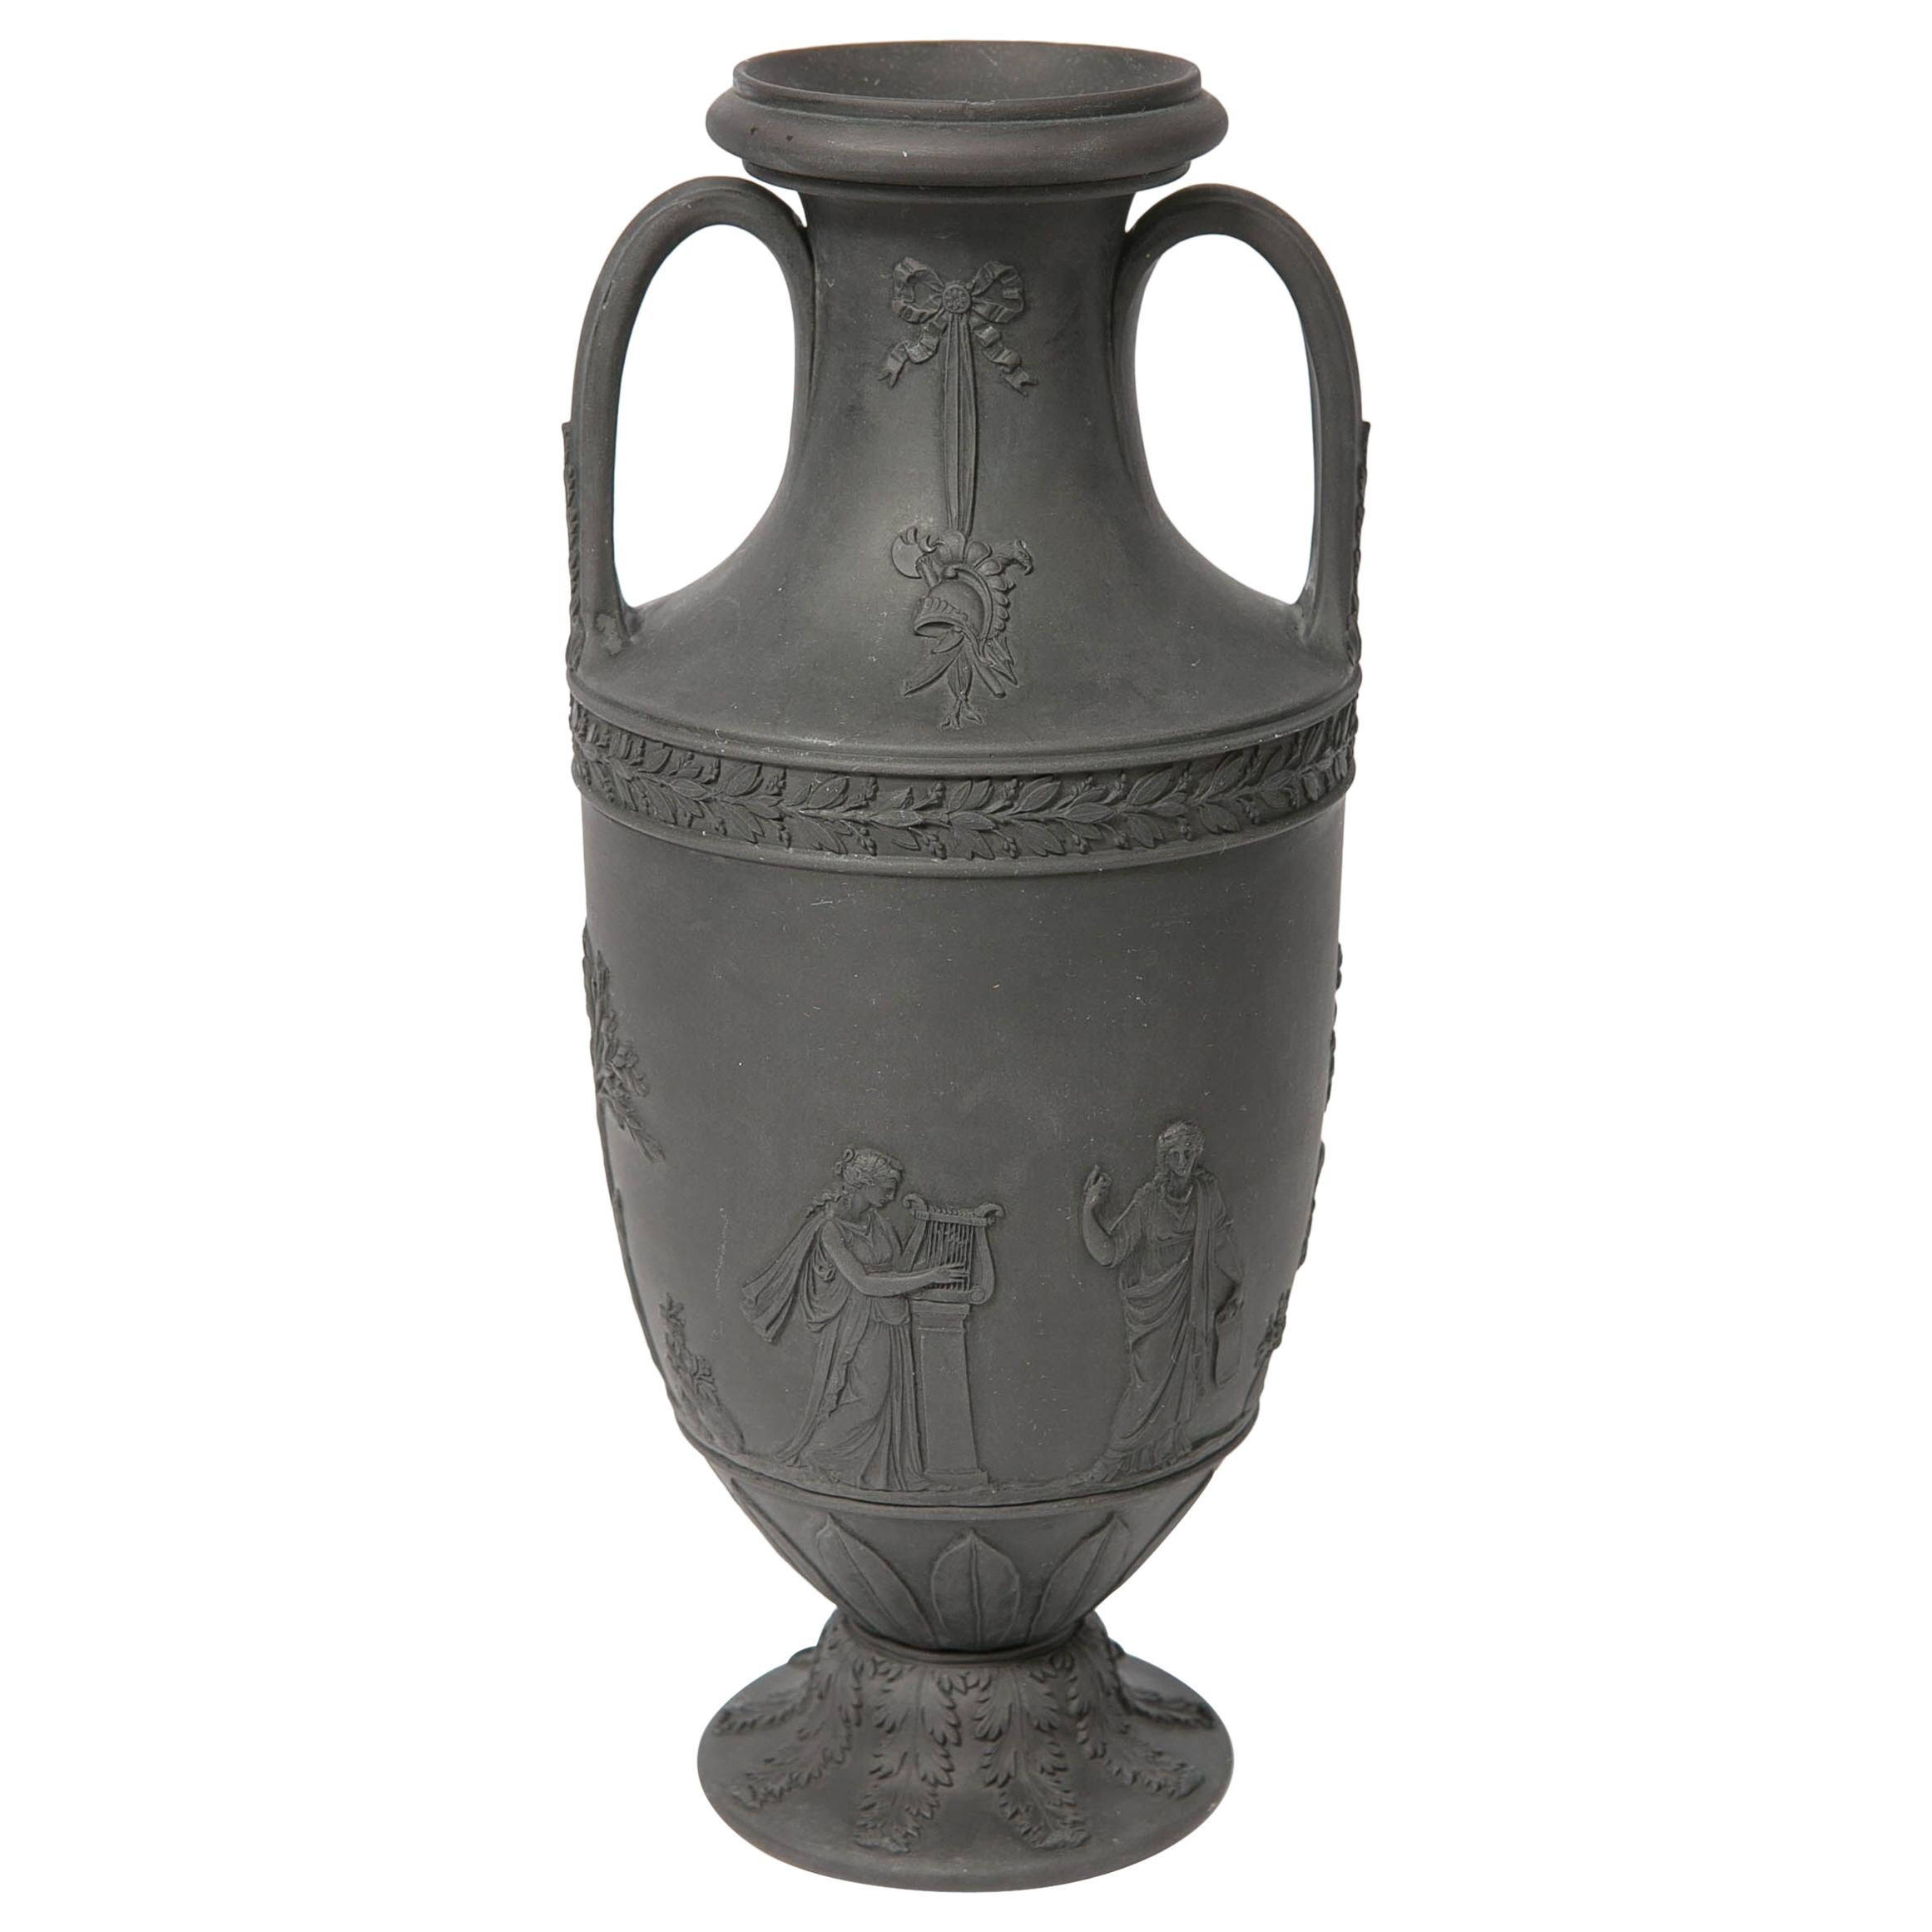 Wedgwood Black Basalt Vase with Classical Figures Made in England, circa 1840